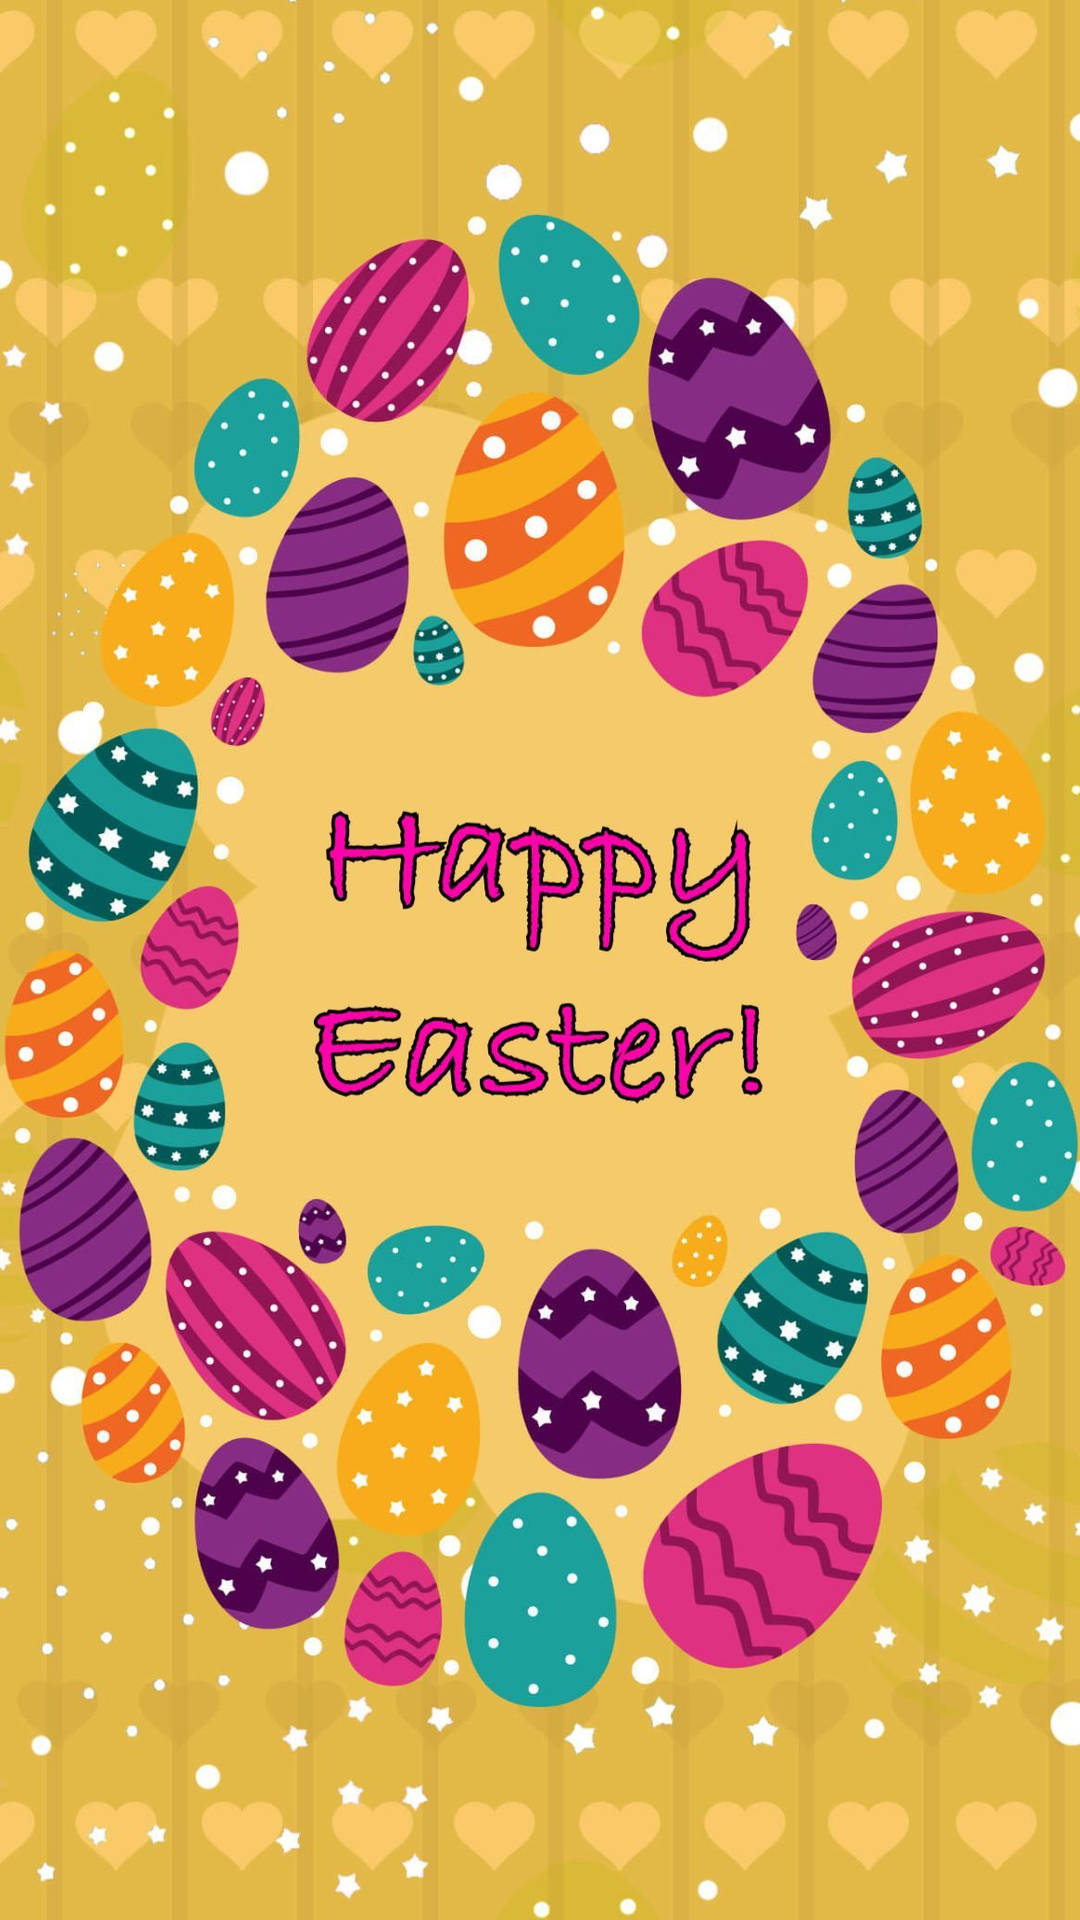 Yellow Happy Easter Greeting Card Digital Art Background